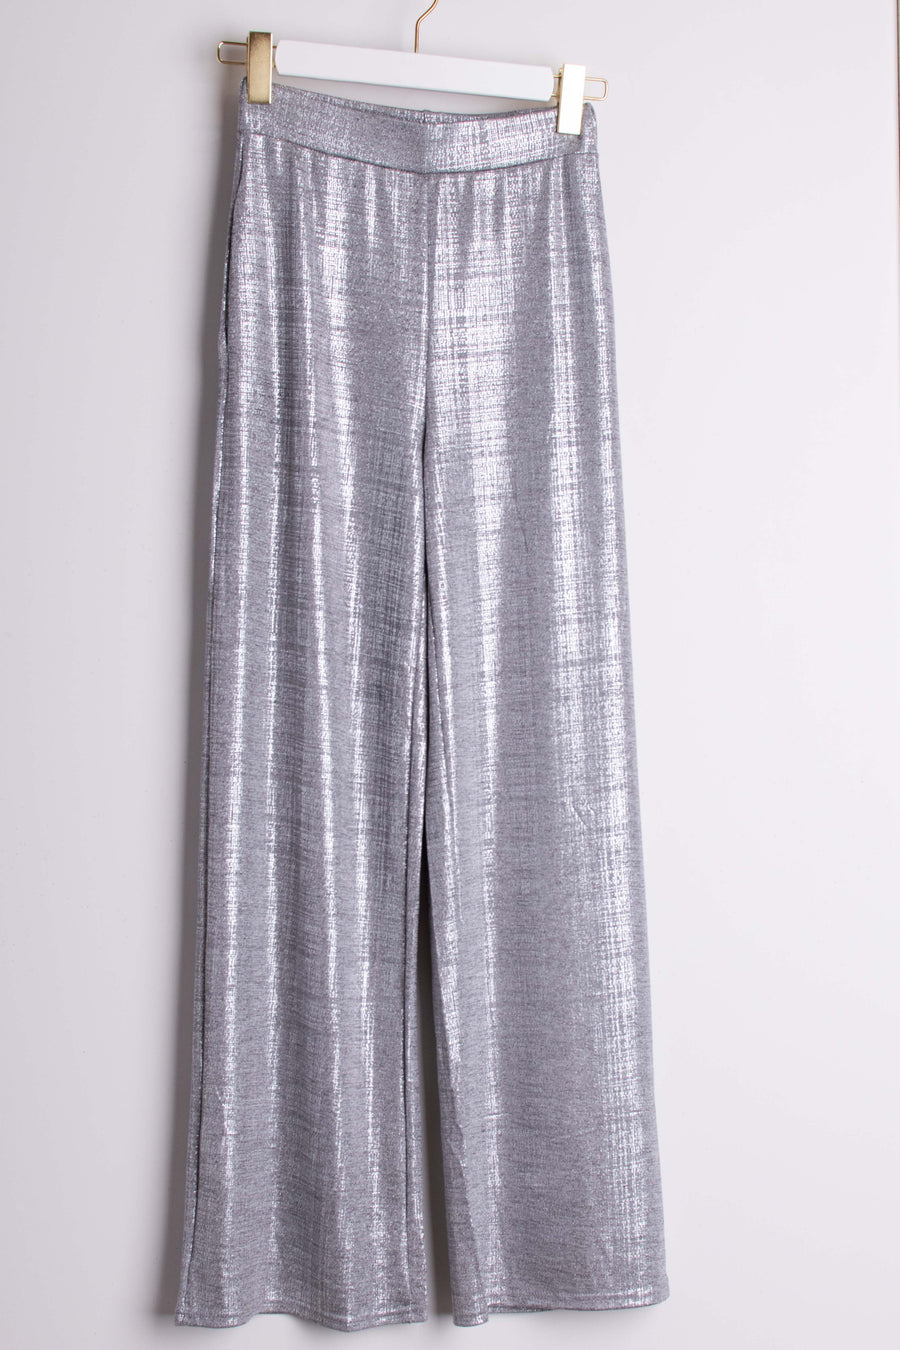 jackieandkate Hose silber relaxed fit